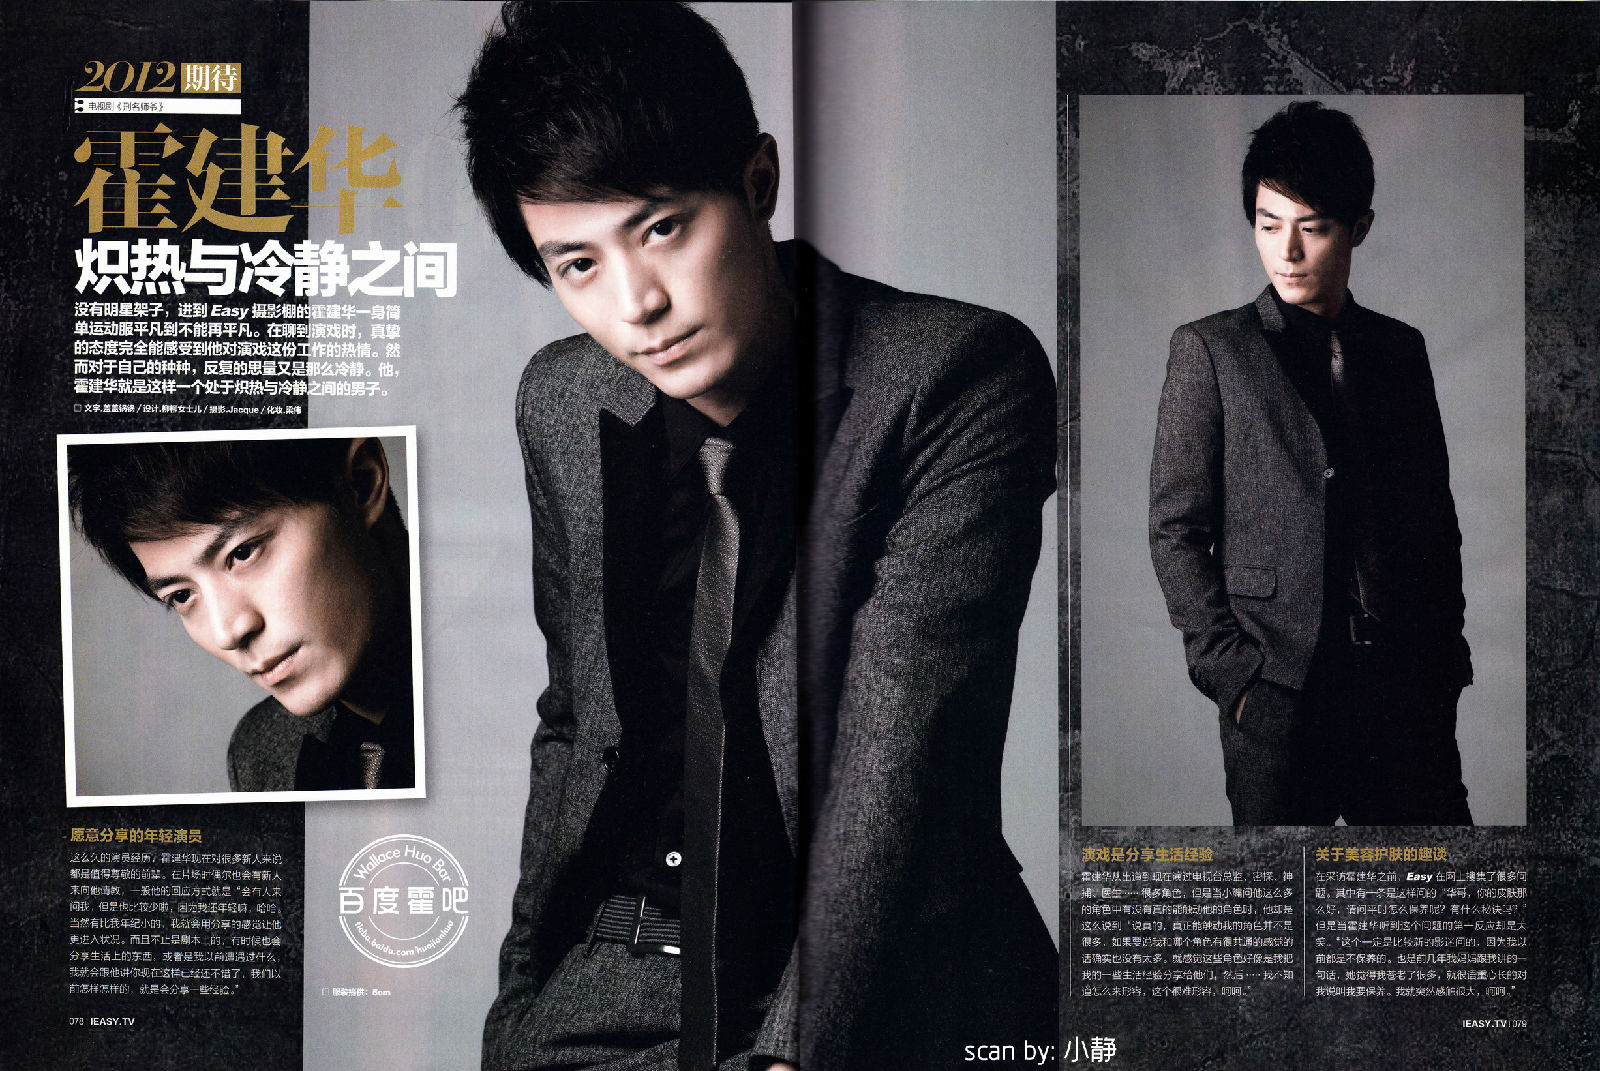 wallacehuo30